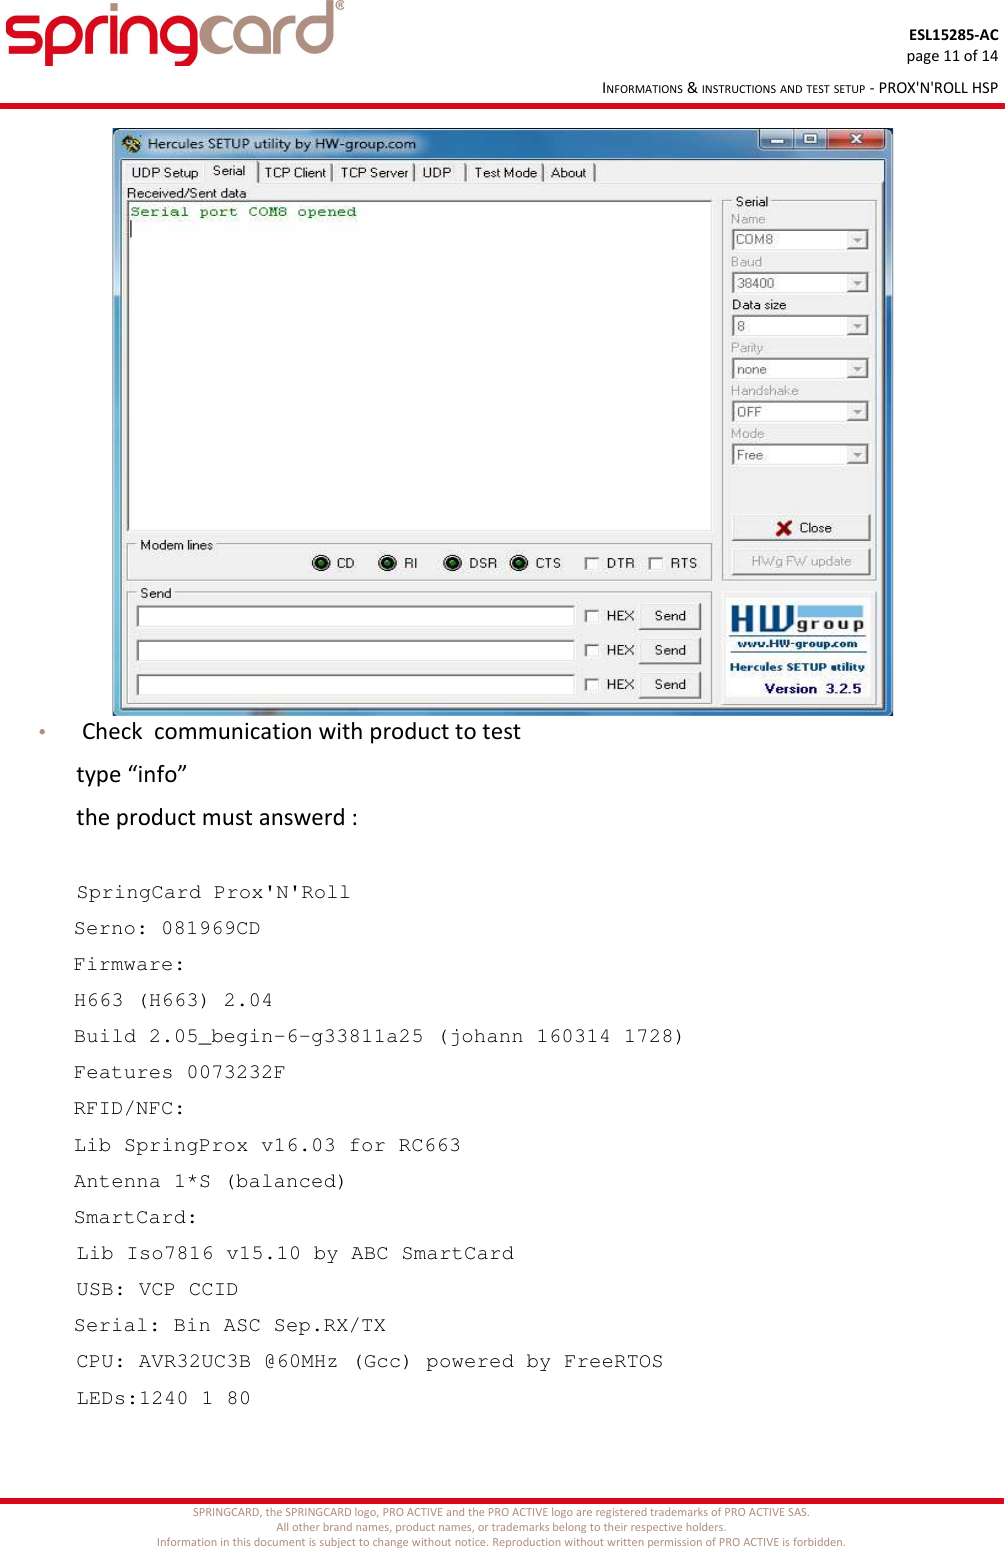 ESL15285-ACpage 11 of 14INFORMATIONS &amp; INSTRUCTIONS AND TEST SETUP - PROX&apos;N&apos;ROLL HSP• Check  communication with product to test type “info”the product must answerd :SpringCard Prox&apos;N&apos;Roll  Serno: 081969CD  Firmware:     H663 (H663) 2.04     Build 2.05_begin-6-g33811a25 (johann 160314 1728)     Features 0073232F  RFID/NFC:     Lib SpringProx v16.03 for RC663     Antenna 1*S (balanced)  SmartCard:      Lib Iso7816 v15.10 by ABC SmartCard      USB: VCP CCID   Serial: Bin ASC Sep.RX/TX      CPU: AVR32UC3B @60MHz (Gcc) powered by FreeRTOS      LEDs:1240 1 80SPRINGCARD, the SPRINGCARD logo, PRO ACTIVE and the PRO ACTIVE logo are registered trademarks of PRO ACTIVE SAS.All other brand names, product names, or trademarks belong to their respective holders.Information in this document is subject to change without notice. Reproduction without written permission of PRO ACTIVE is forbidden.